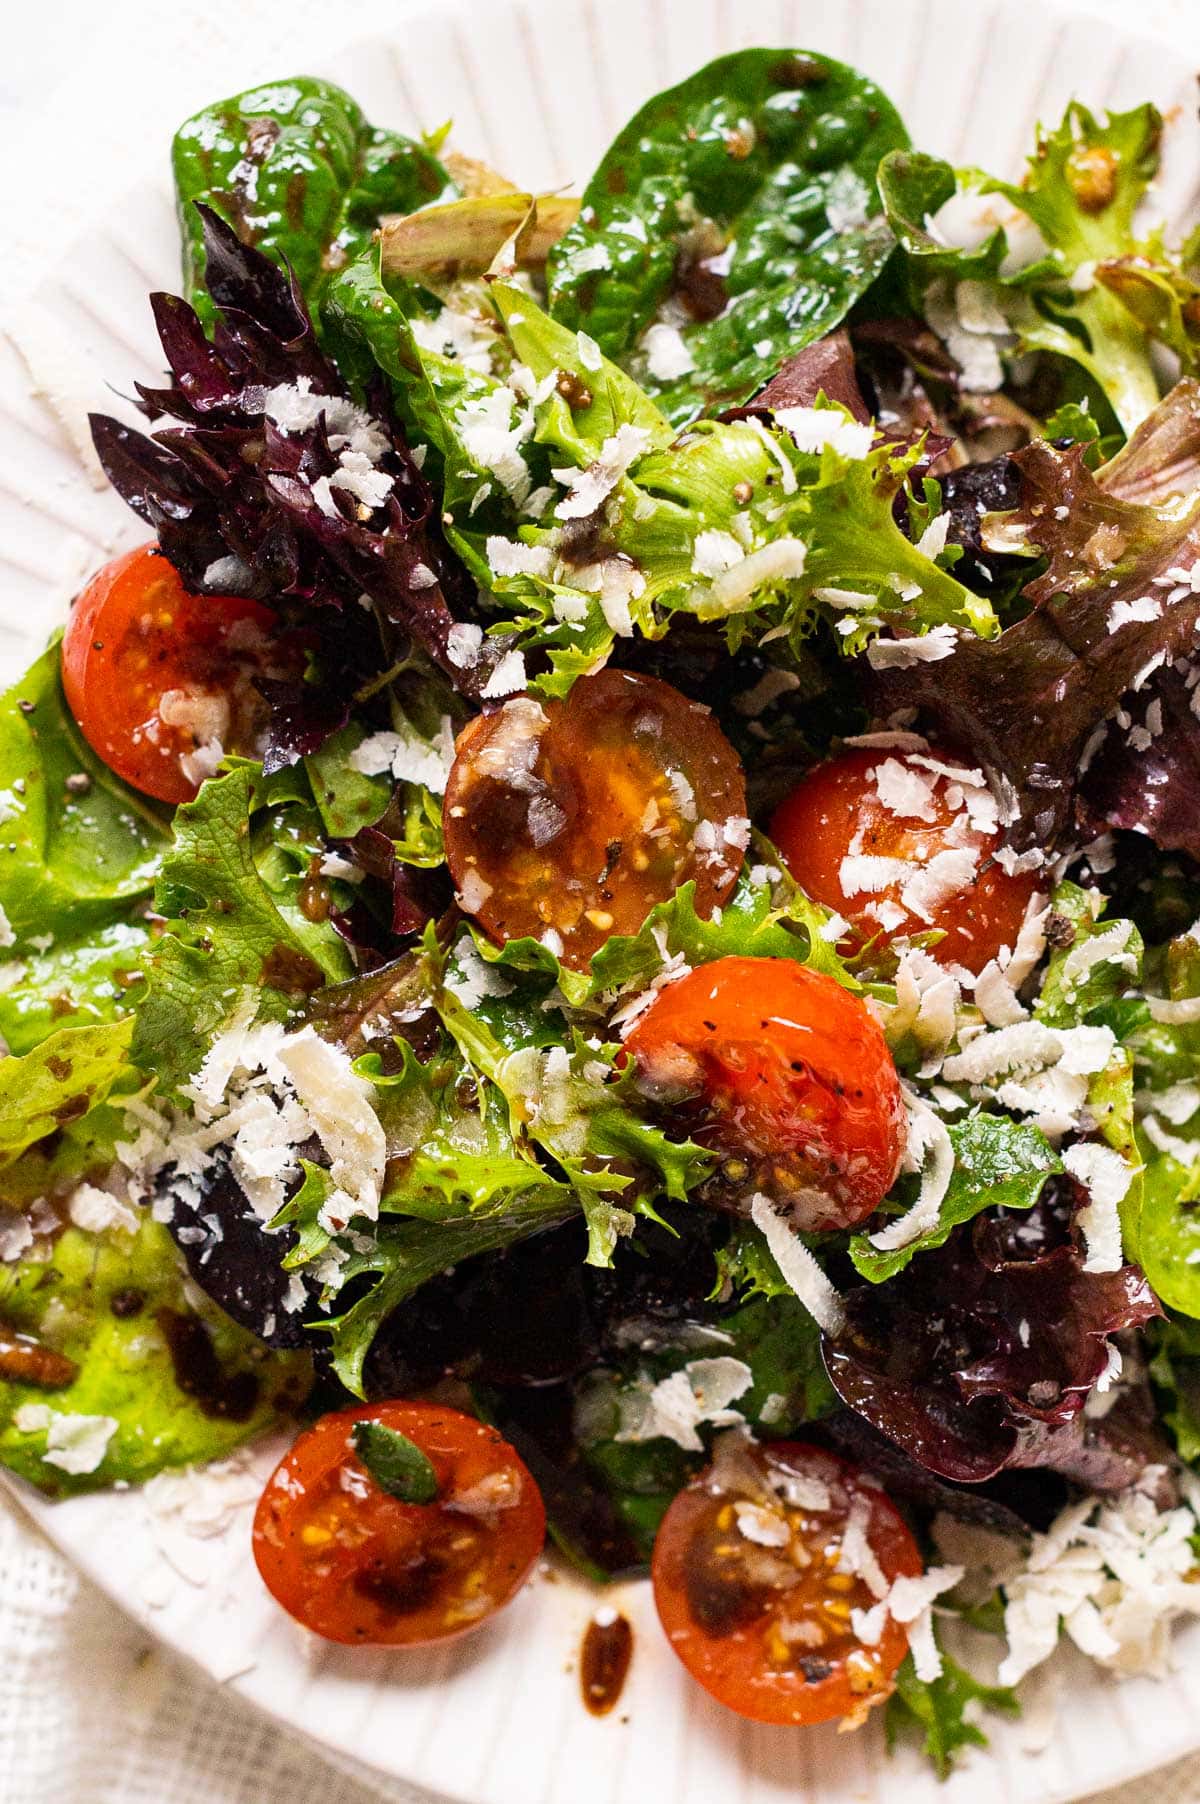 Simple salad with spring mix, cherry tomatoes, parmesan cheese and balsamic vinaigrette.